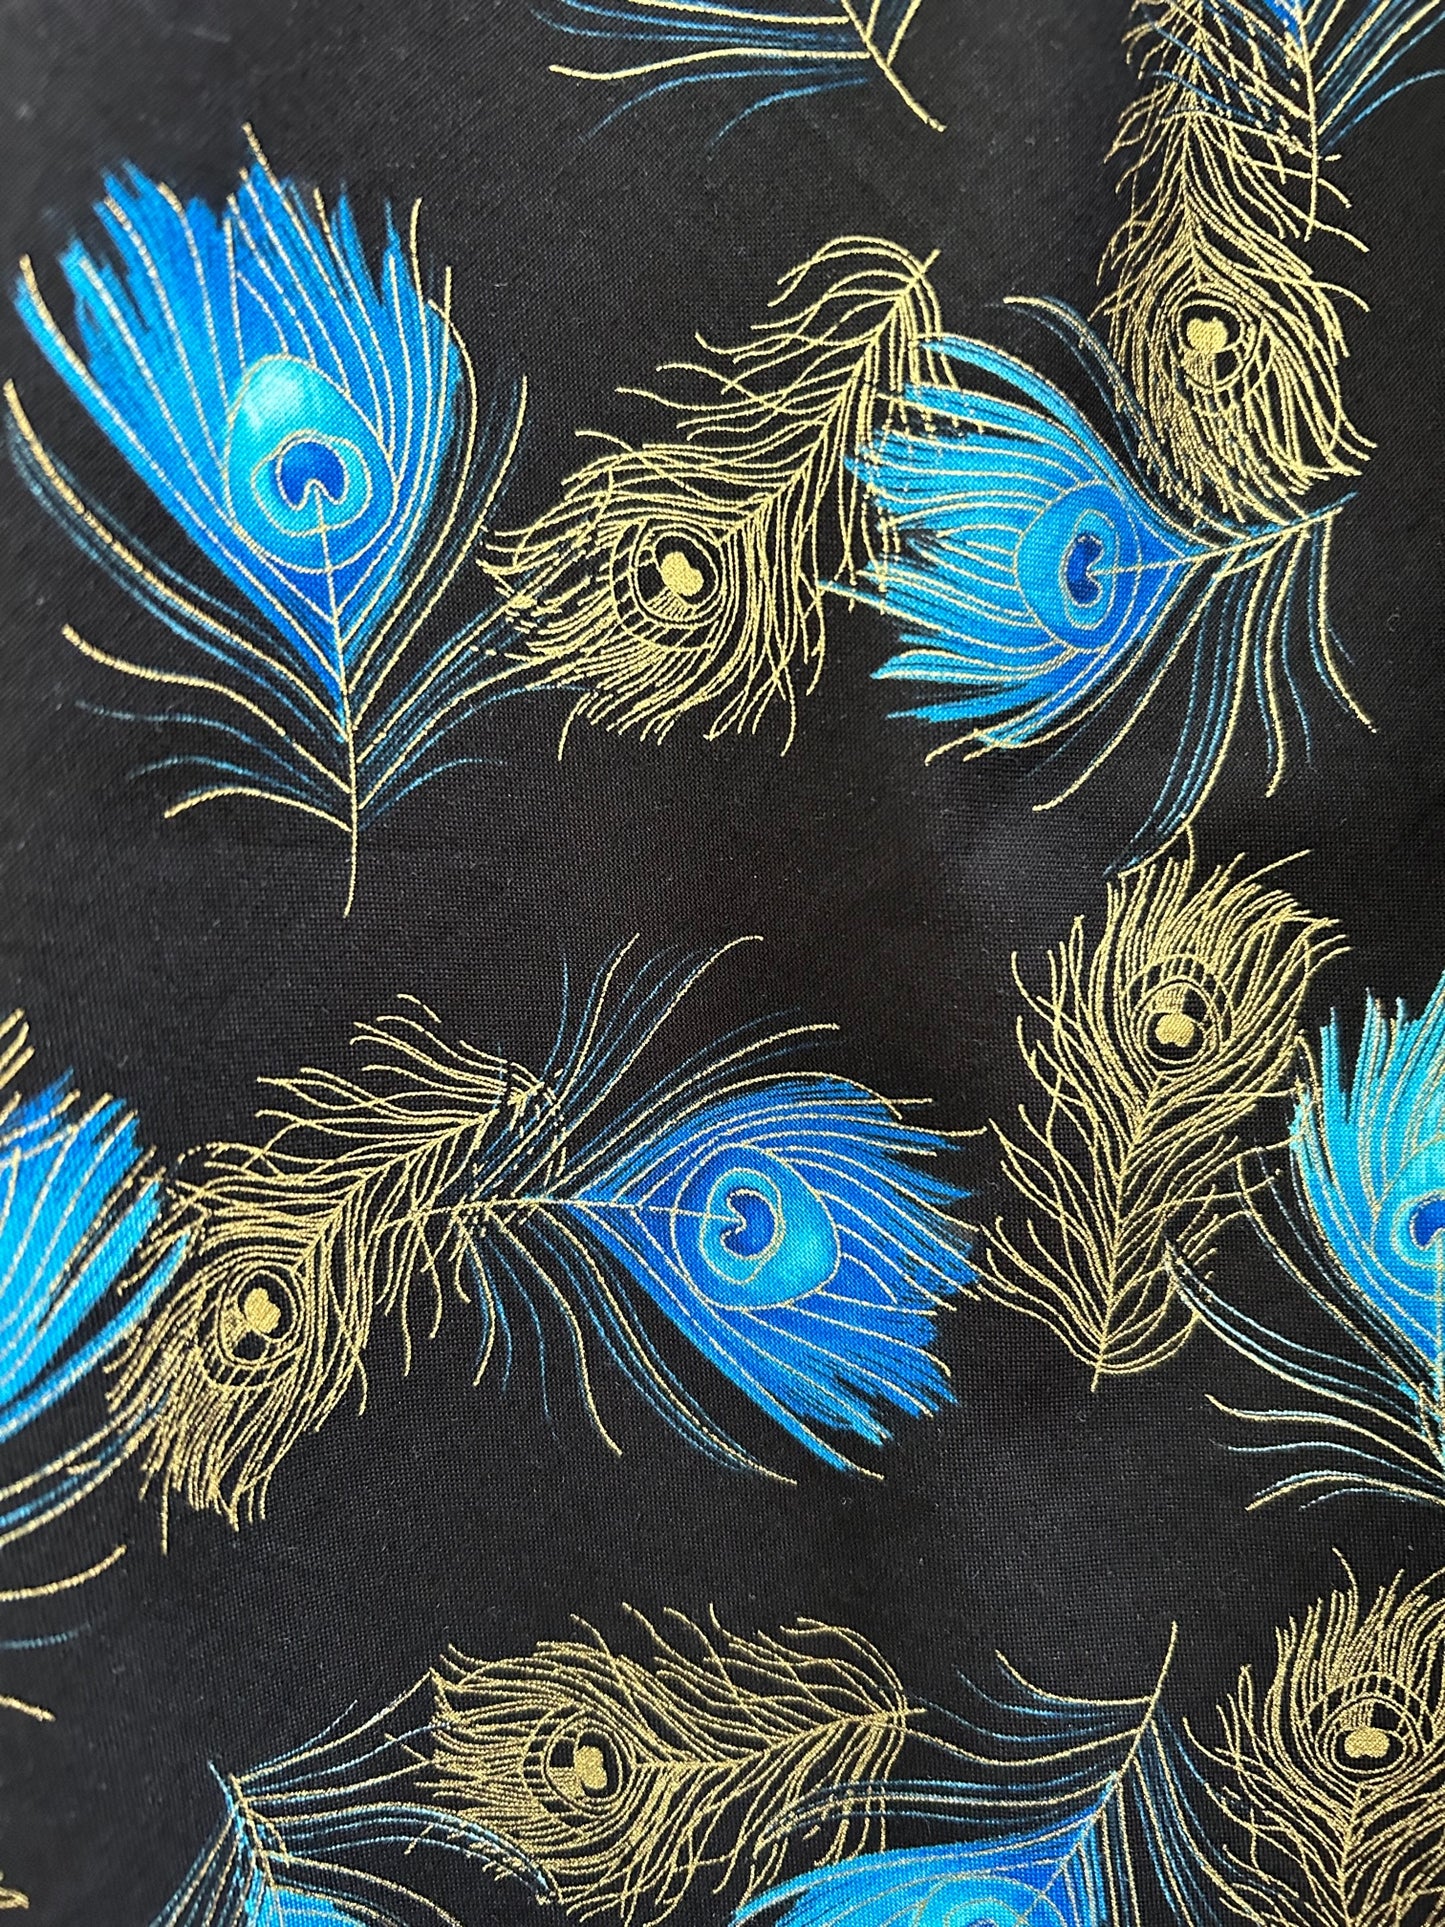 a close up of the fabric showing gold and blue peacock feathers